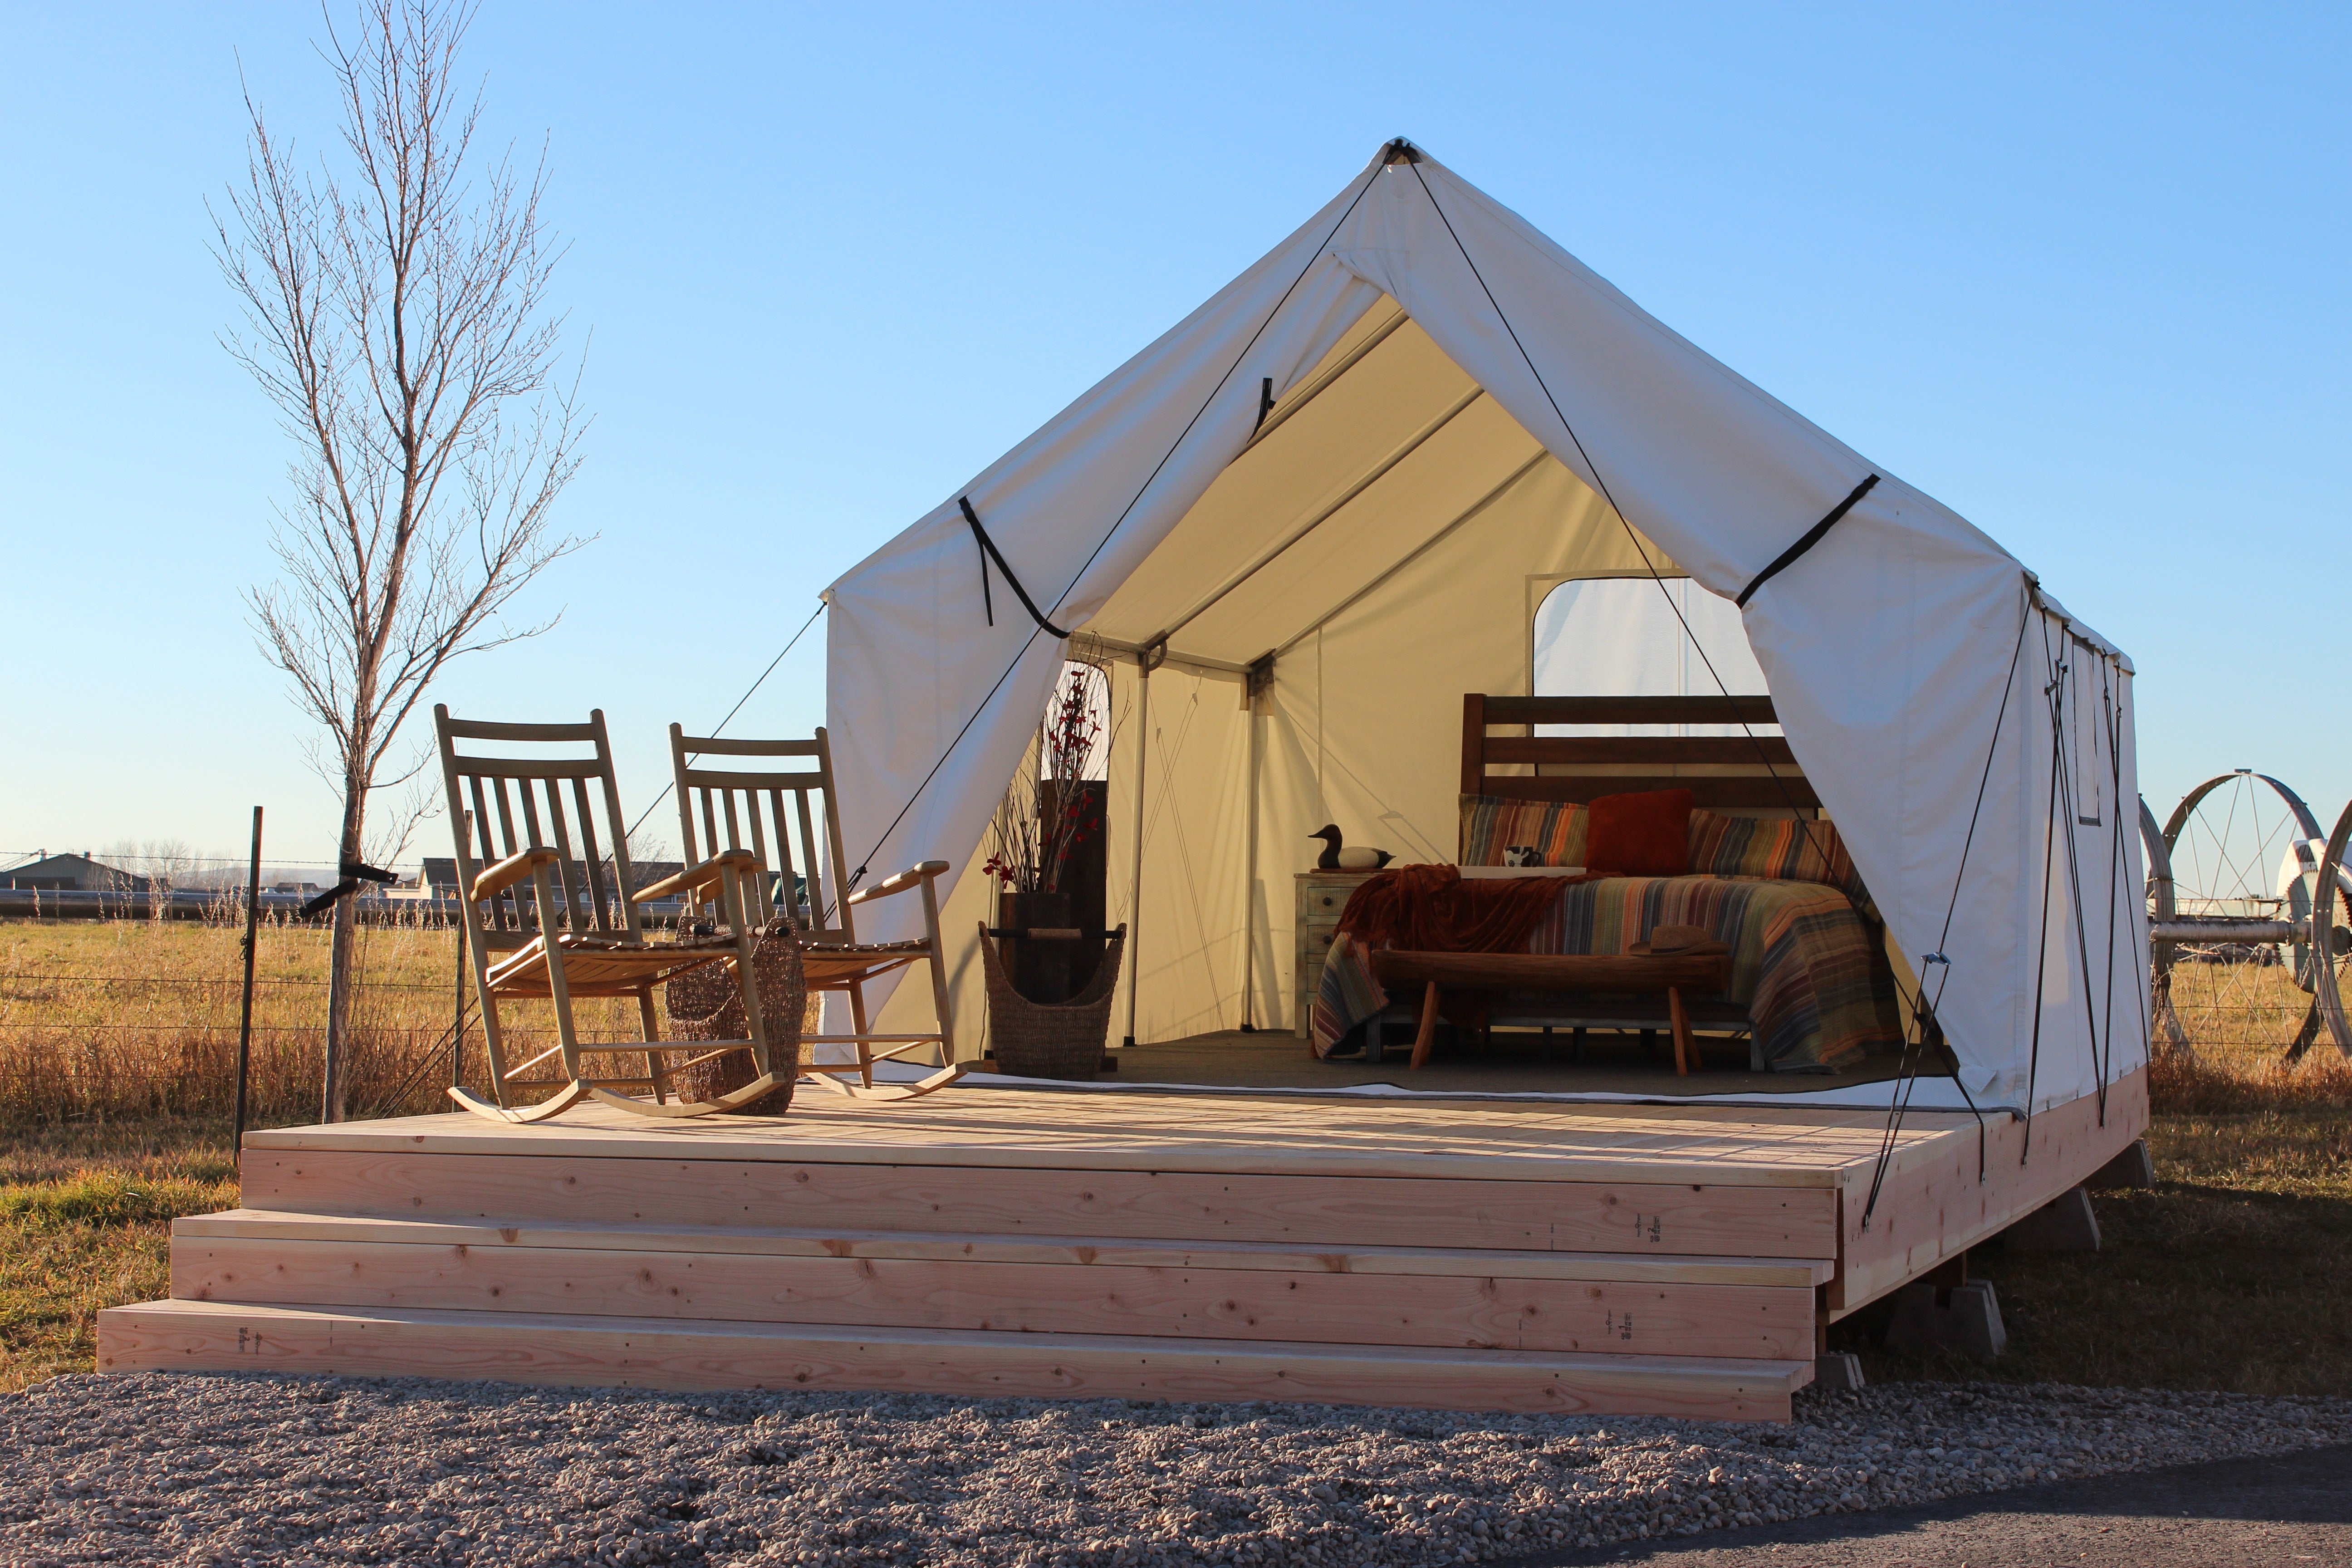 Luxury Camping Tents For Sale - FREE SHIPPING